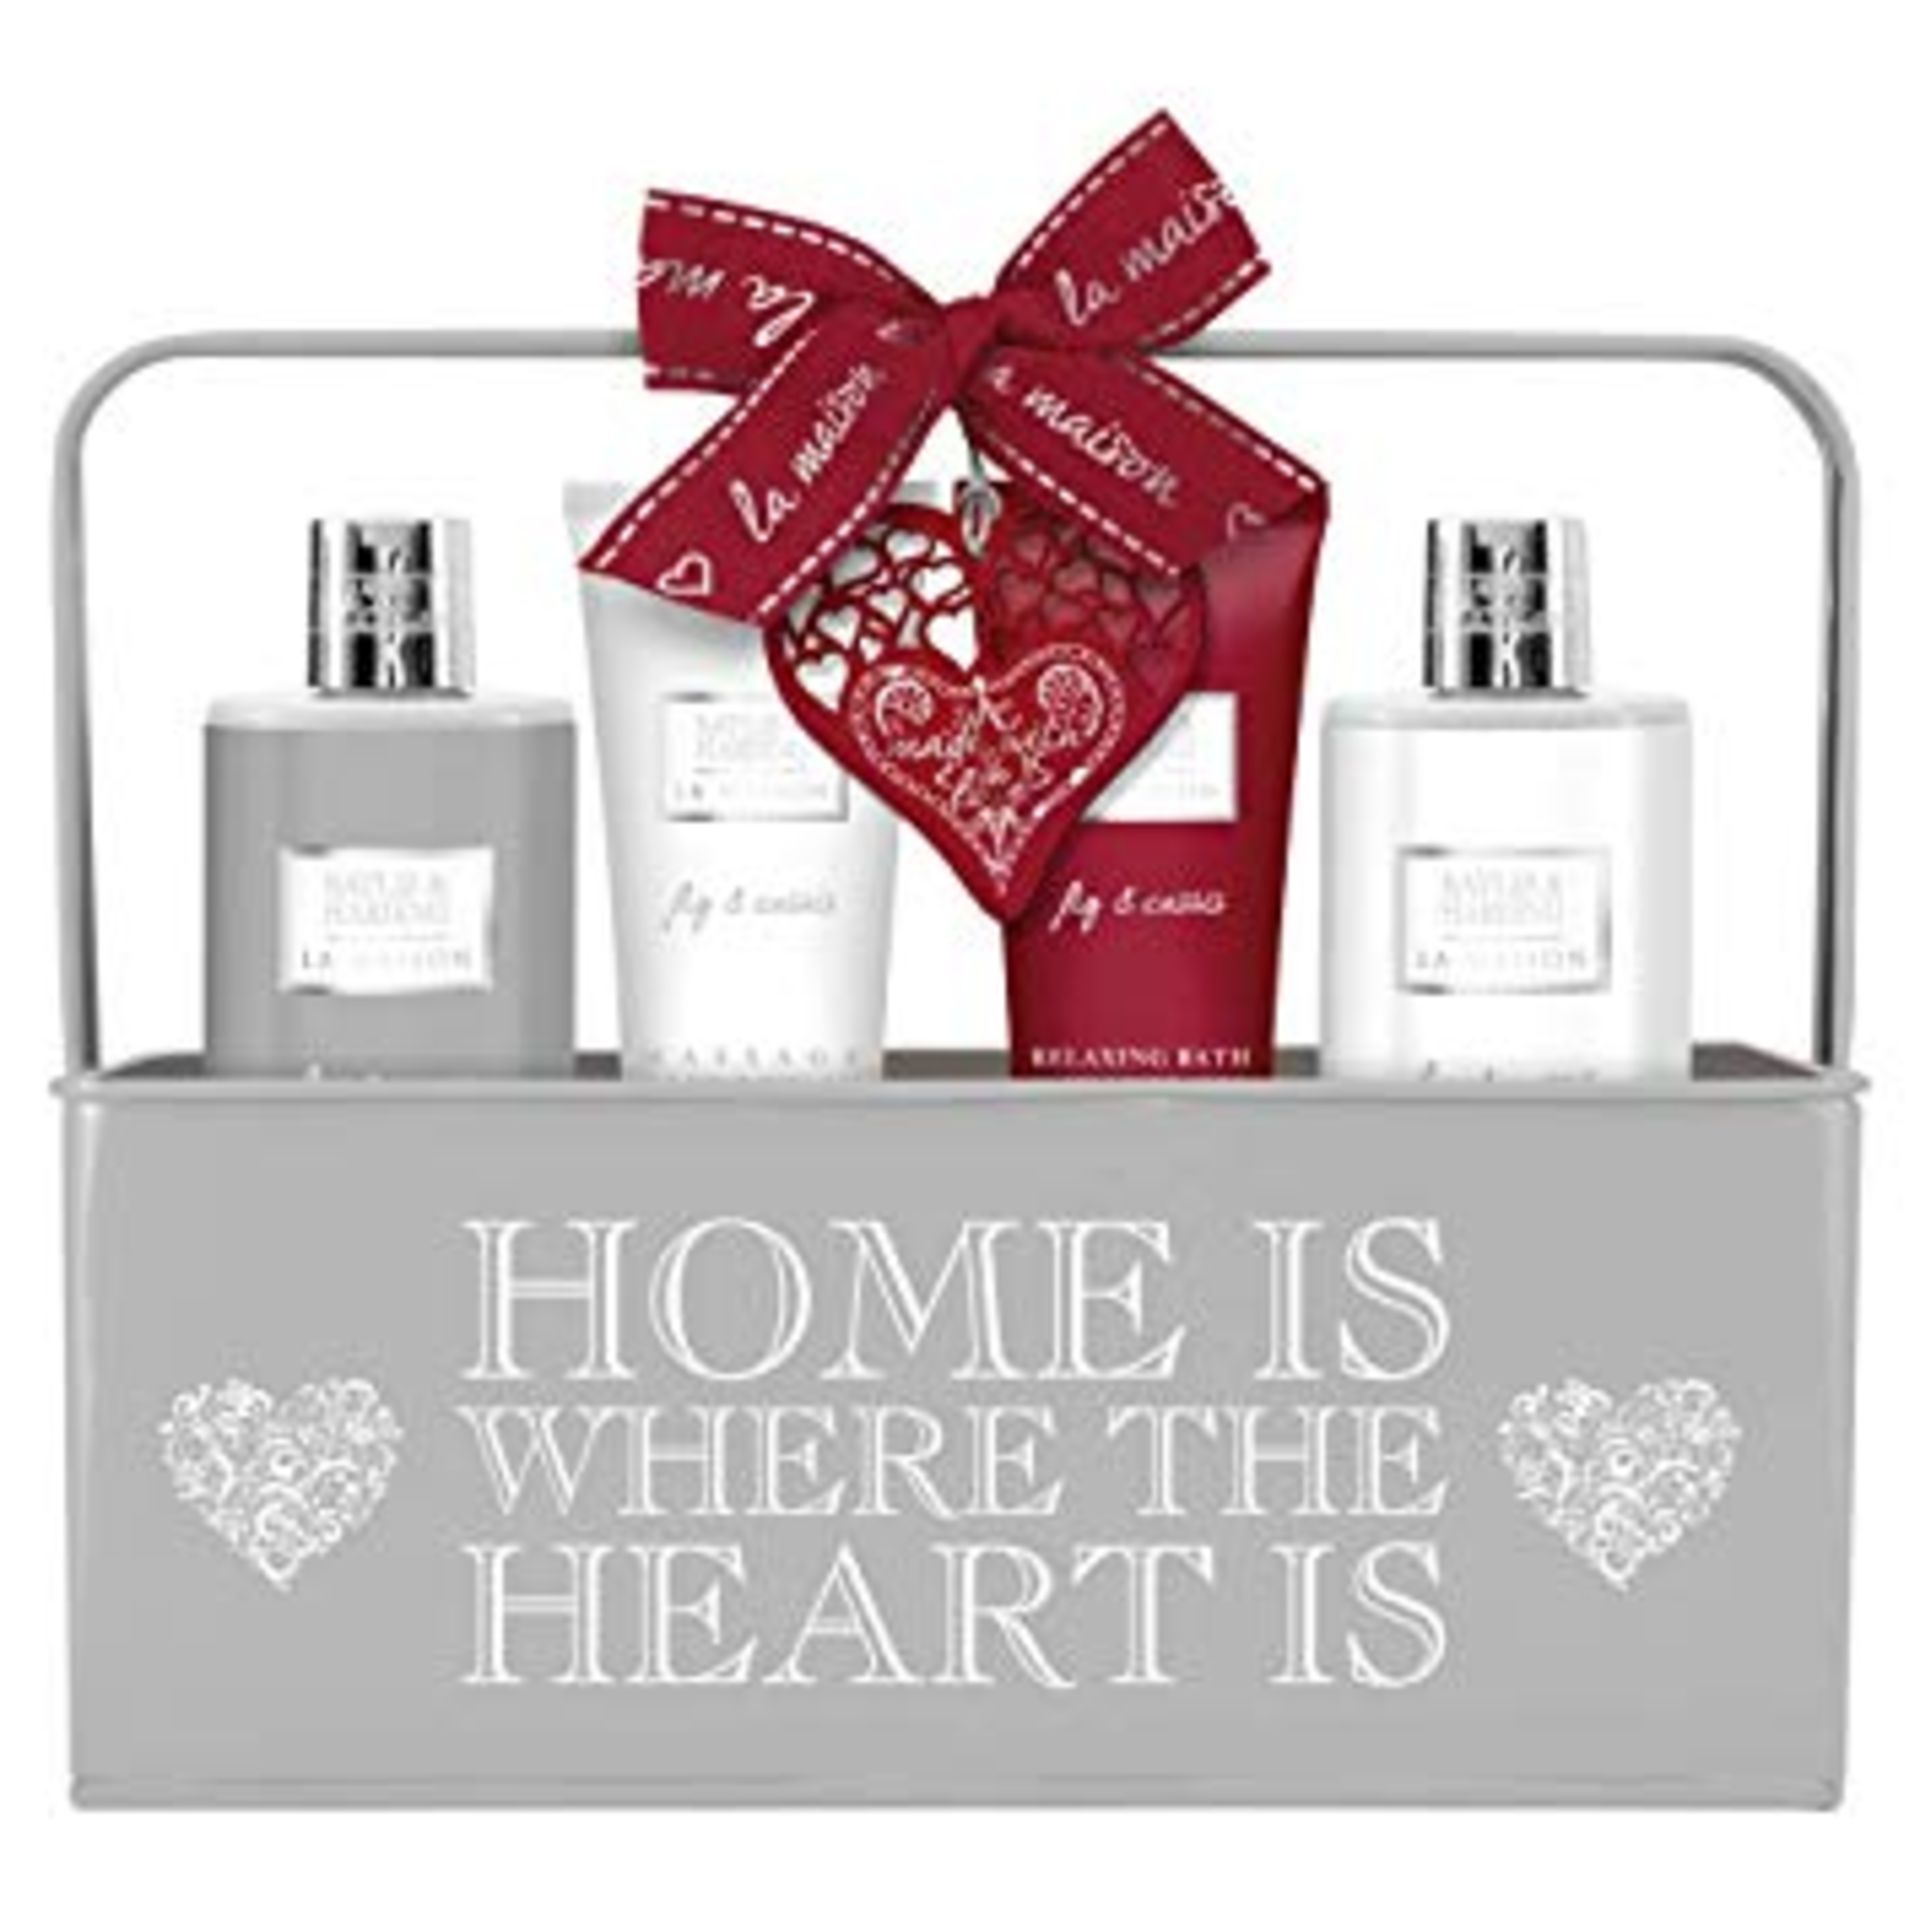 V Brand New Baylis & Harding Home Is Where The Heart Is La Maison Fig & Cassis Gift Set ISP £23.